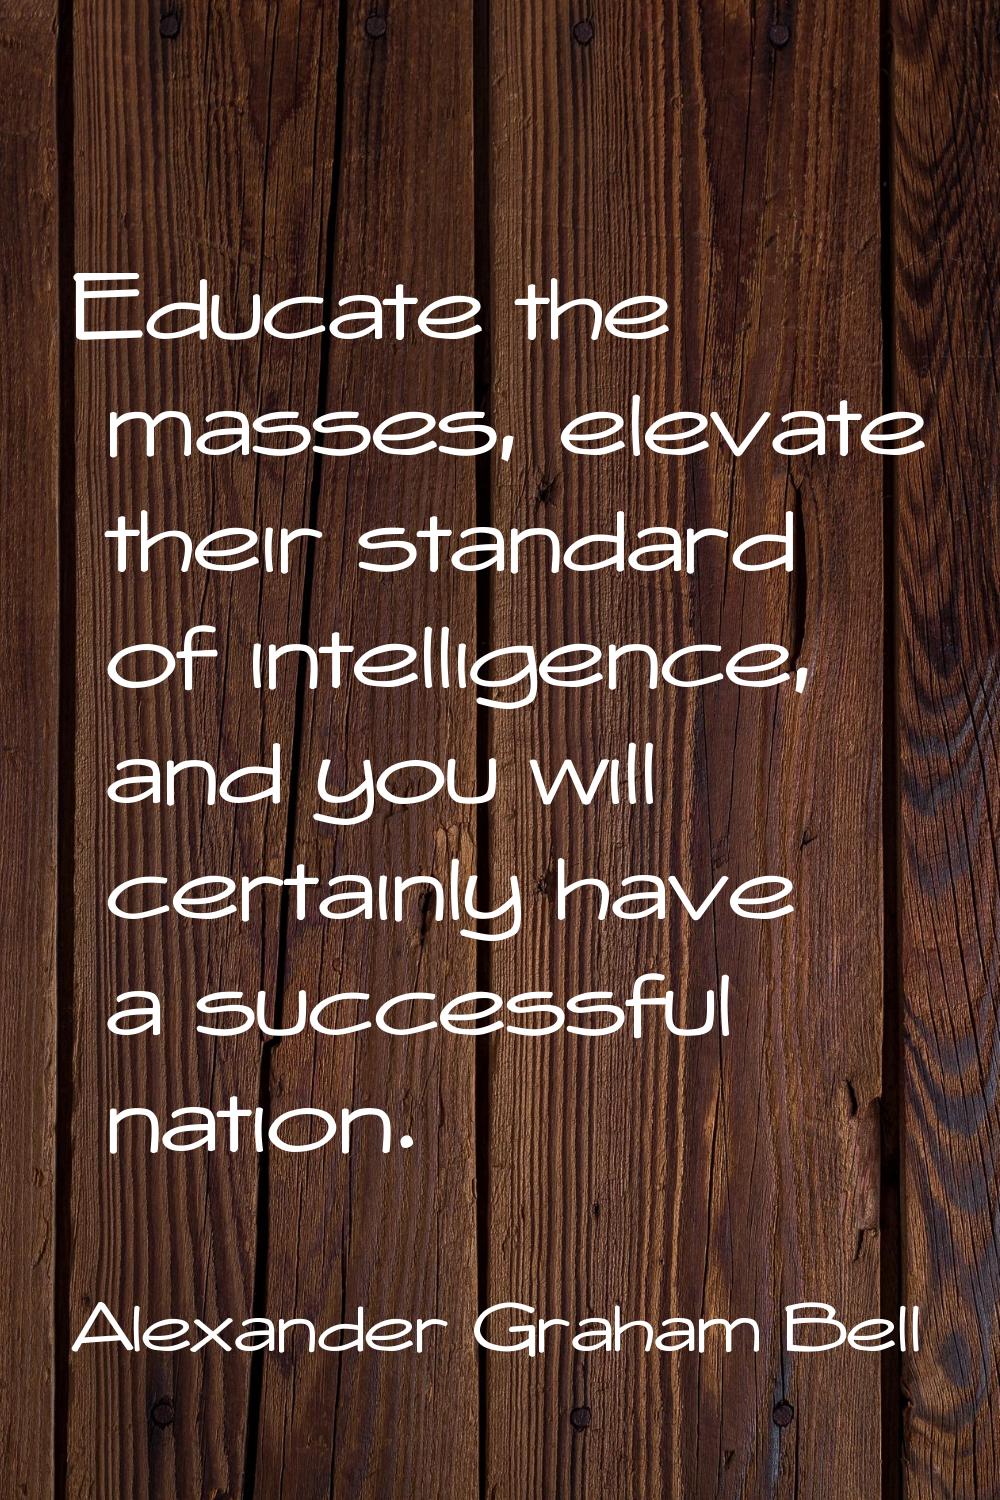 Educate the masses, elevate their standard of intelligence, and you will certainly have a successfu